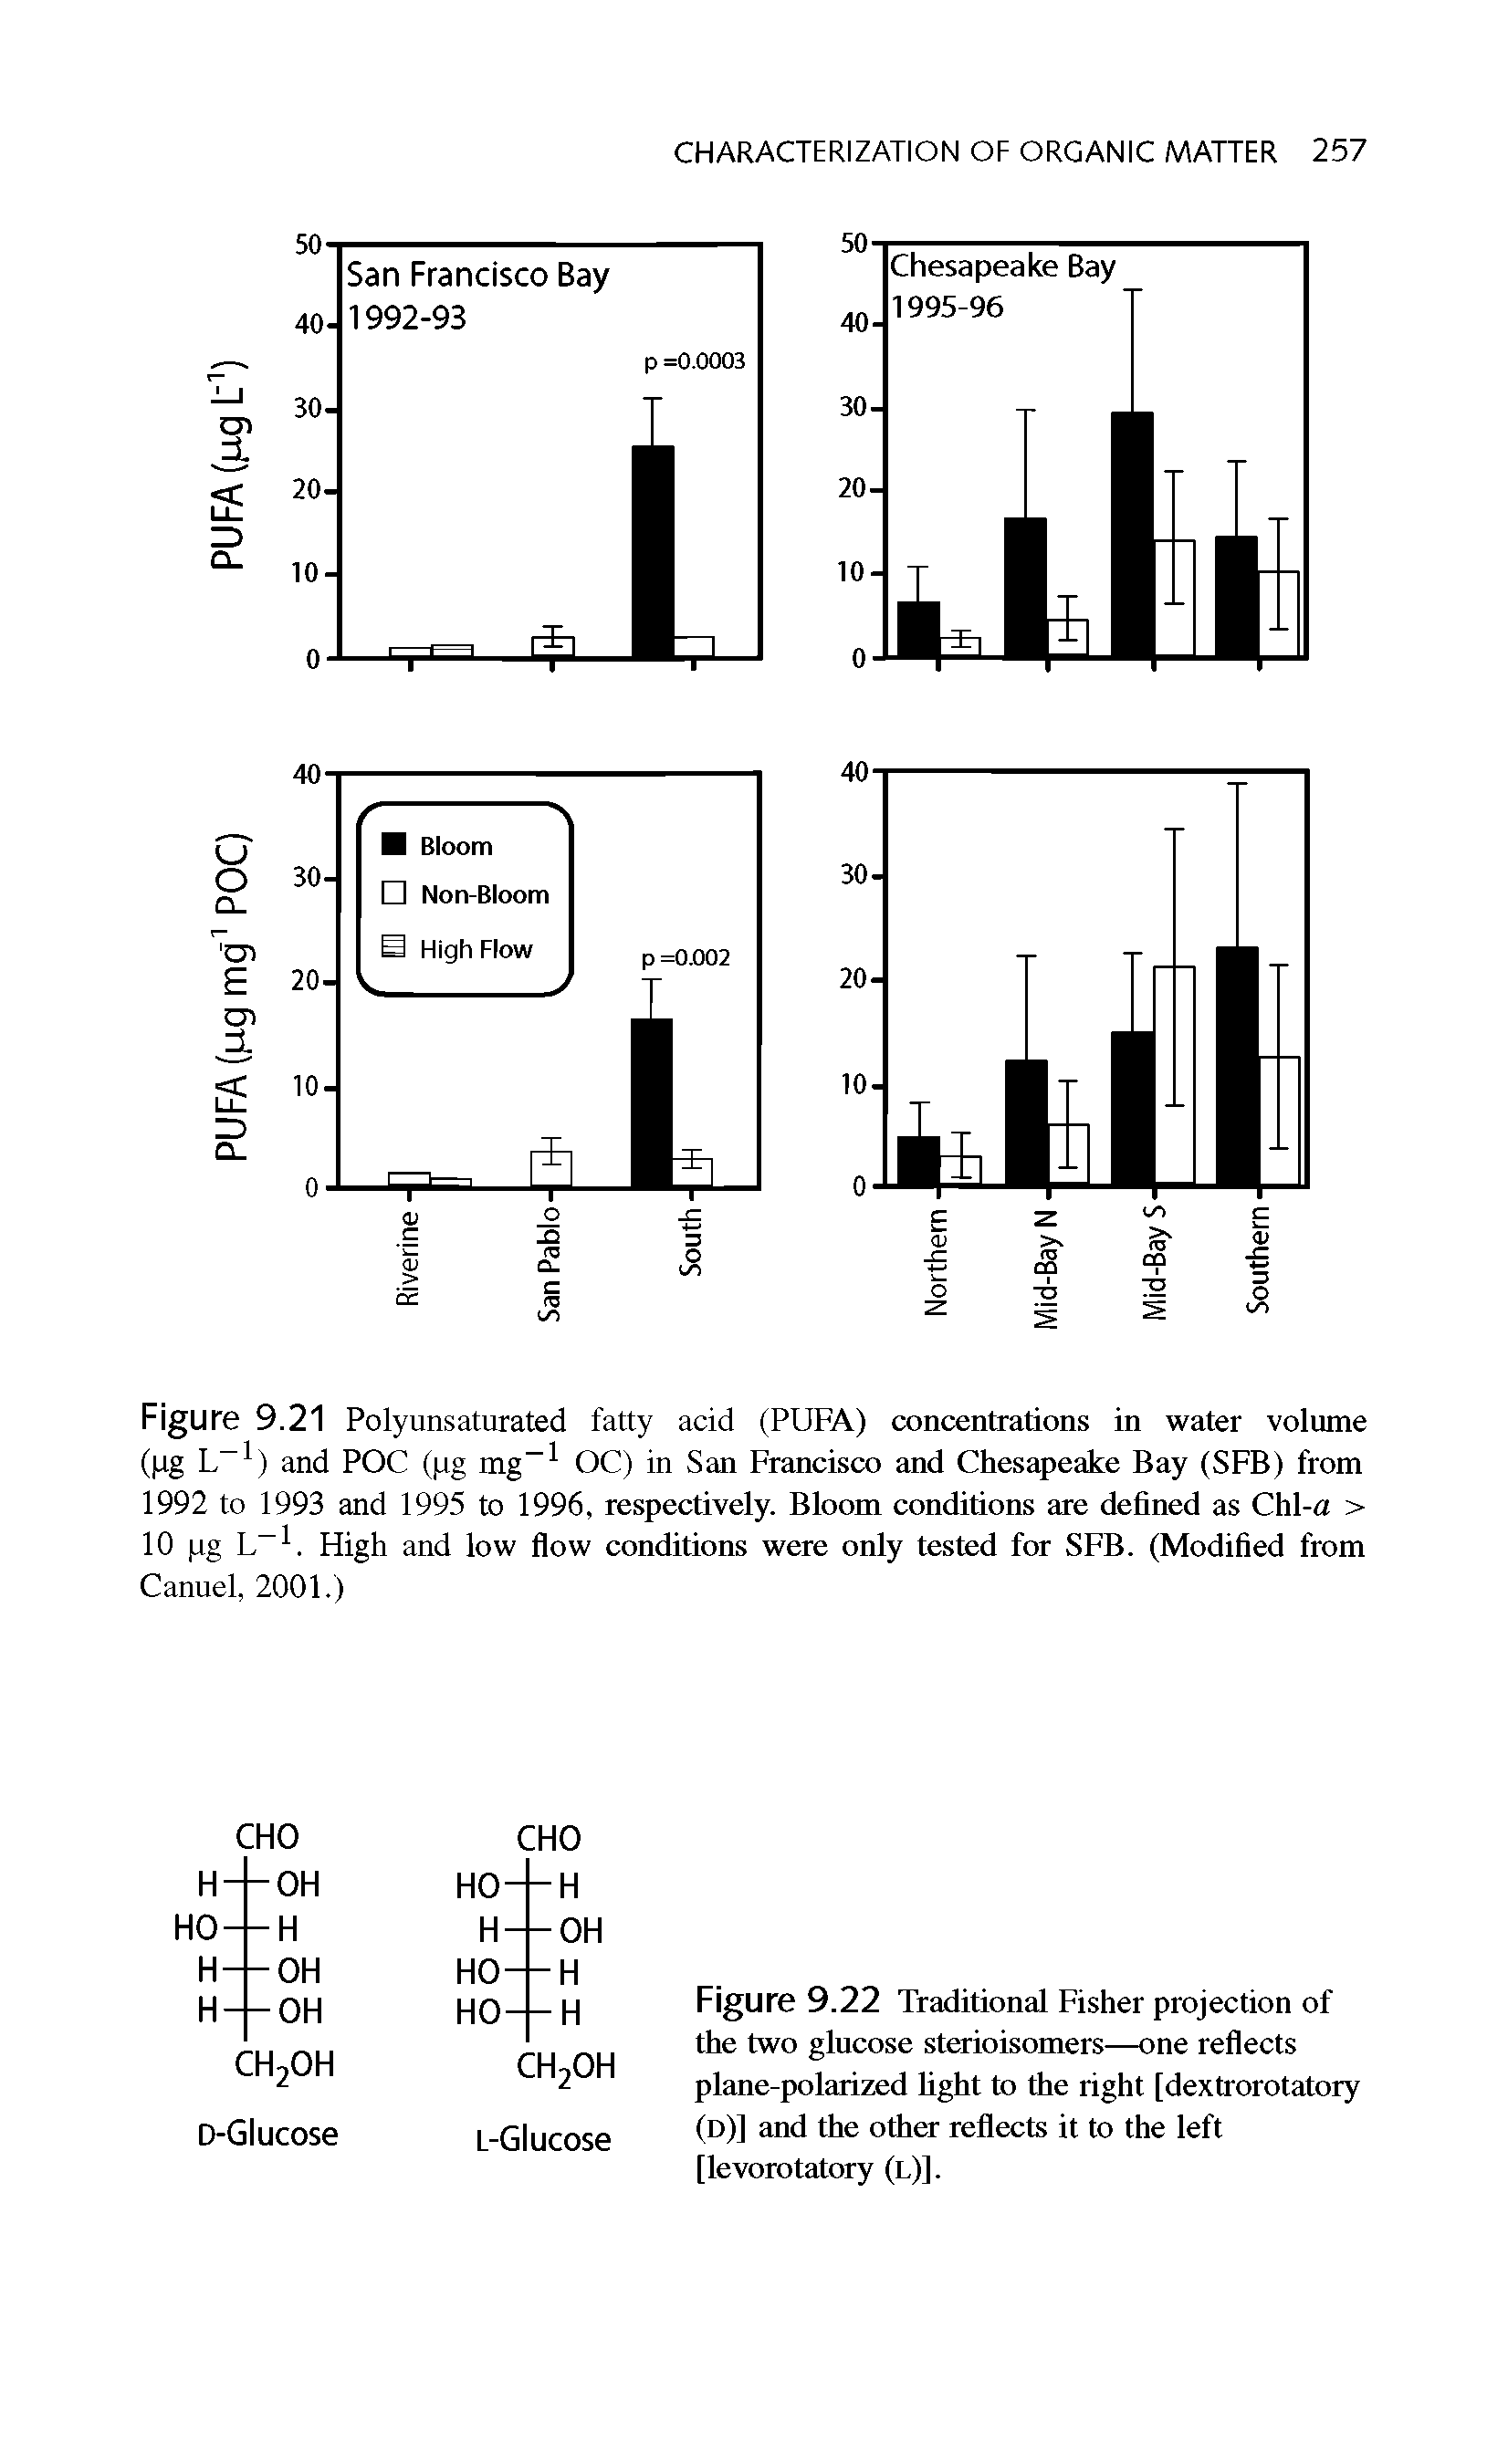 Figure 9.21 Polyunsaturated fatty acid (PUFA) concentrations in water volume (,ug L-1) and POC (ug mg-1 OC) in San Francisco and Chesapeake Bay (SFB) from 1992 to 1993 and 1995 to 1996, respectively. Bloom conditions are defined as Chl-a > 10 ug L-1. High and low flow conditions were only tested for SFB. (Modified from Canuel, 2001.)...